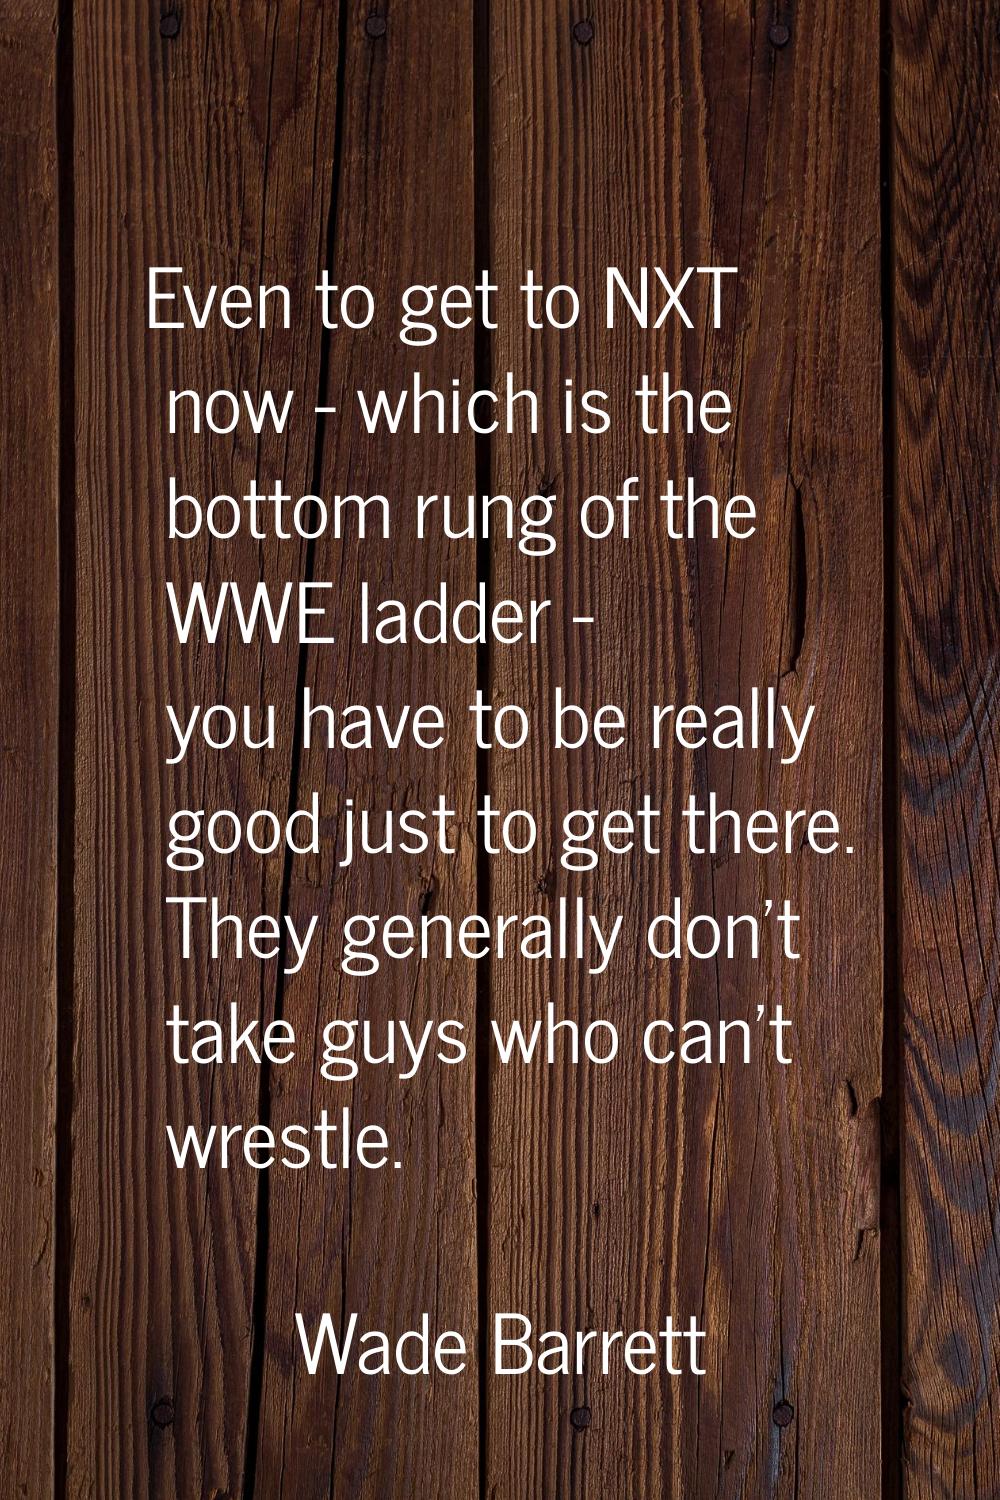 Even to get to NXT now - which is the bottom rung of the WWE ladder - you have to be really good ju